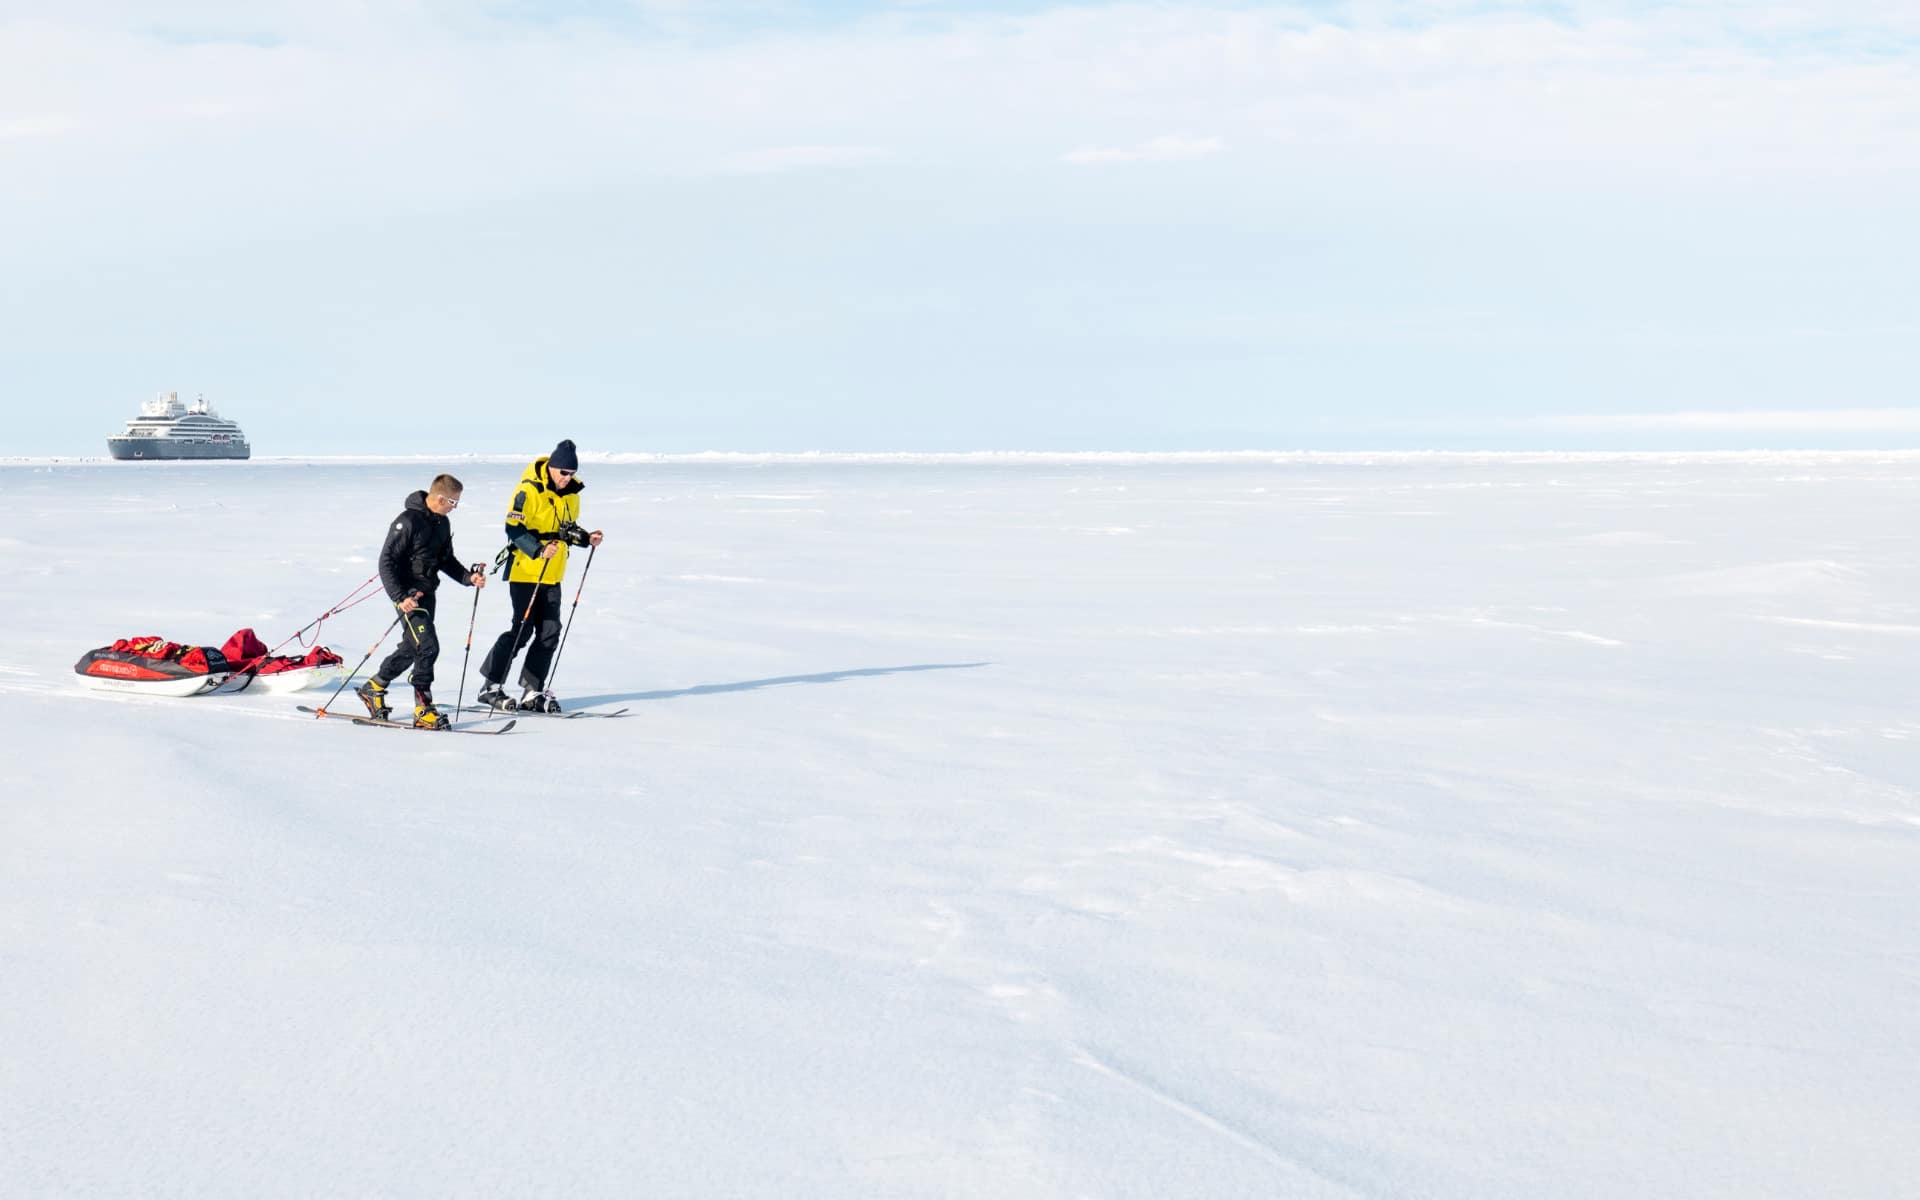 The Polar Raid is a unique expedition expereince available to Ponant guests.